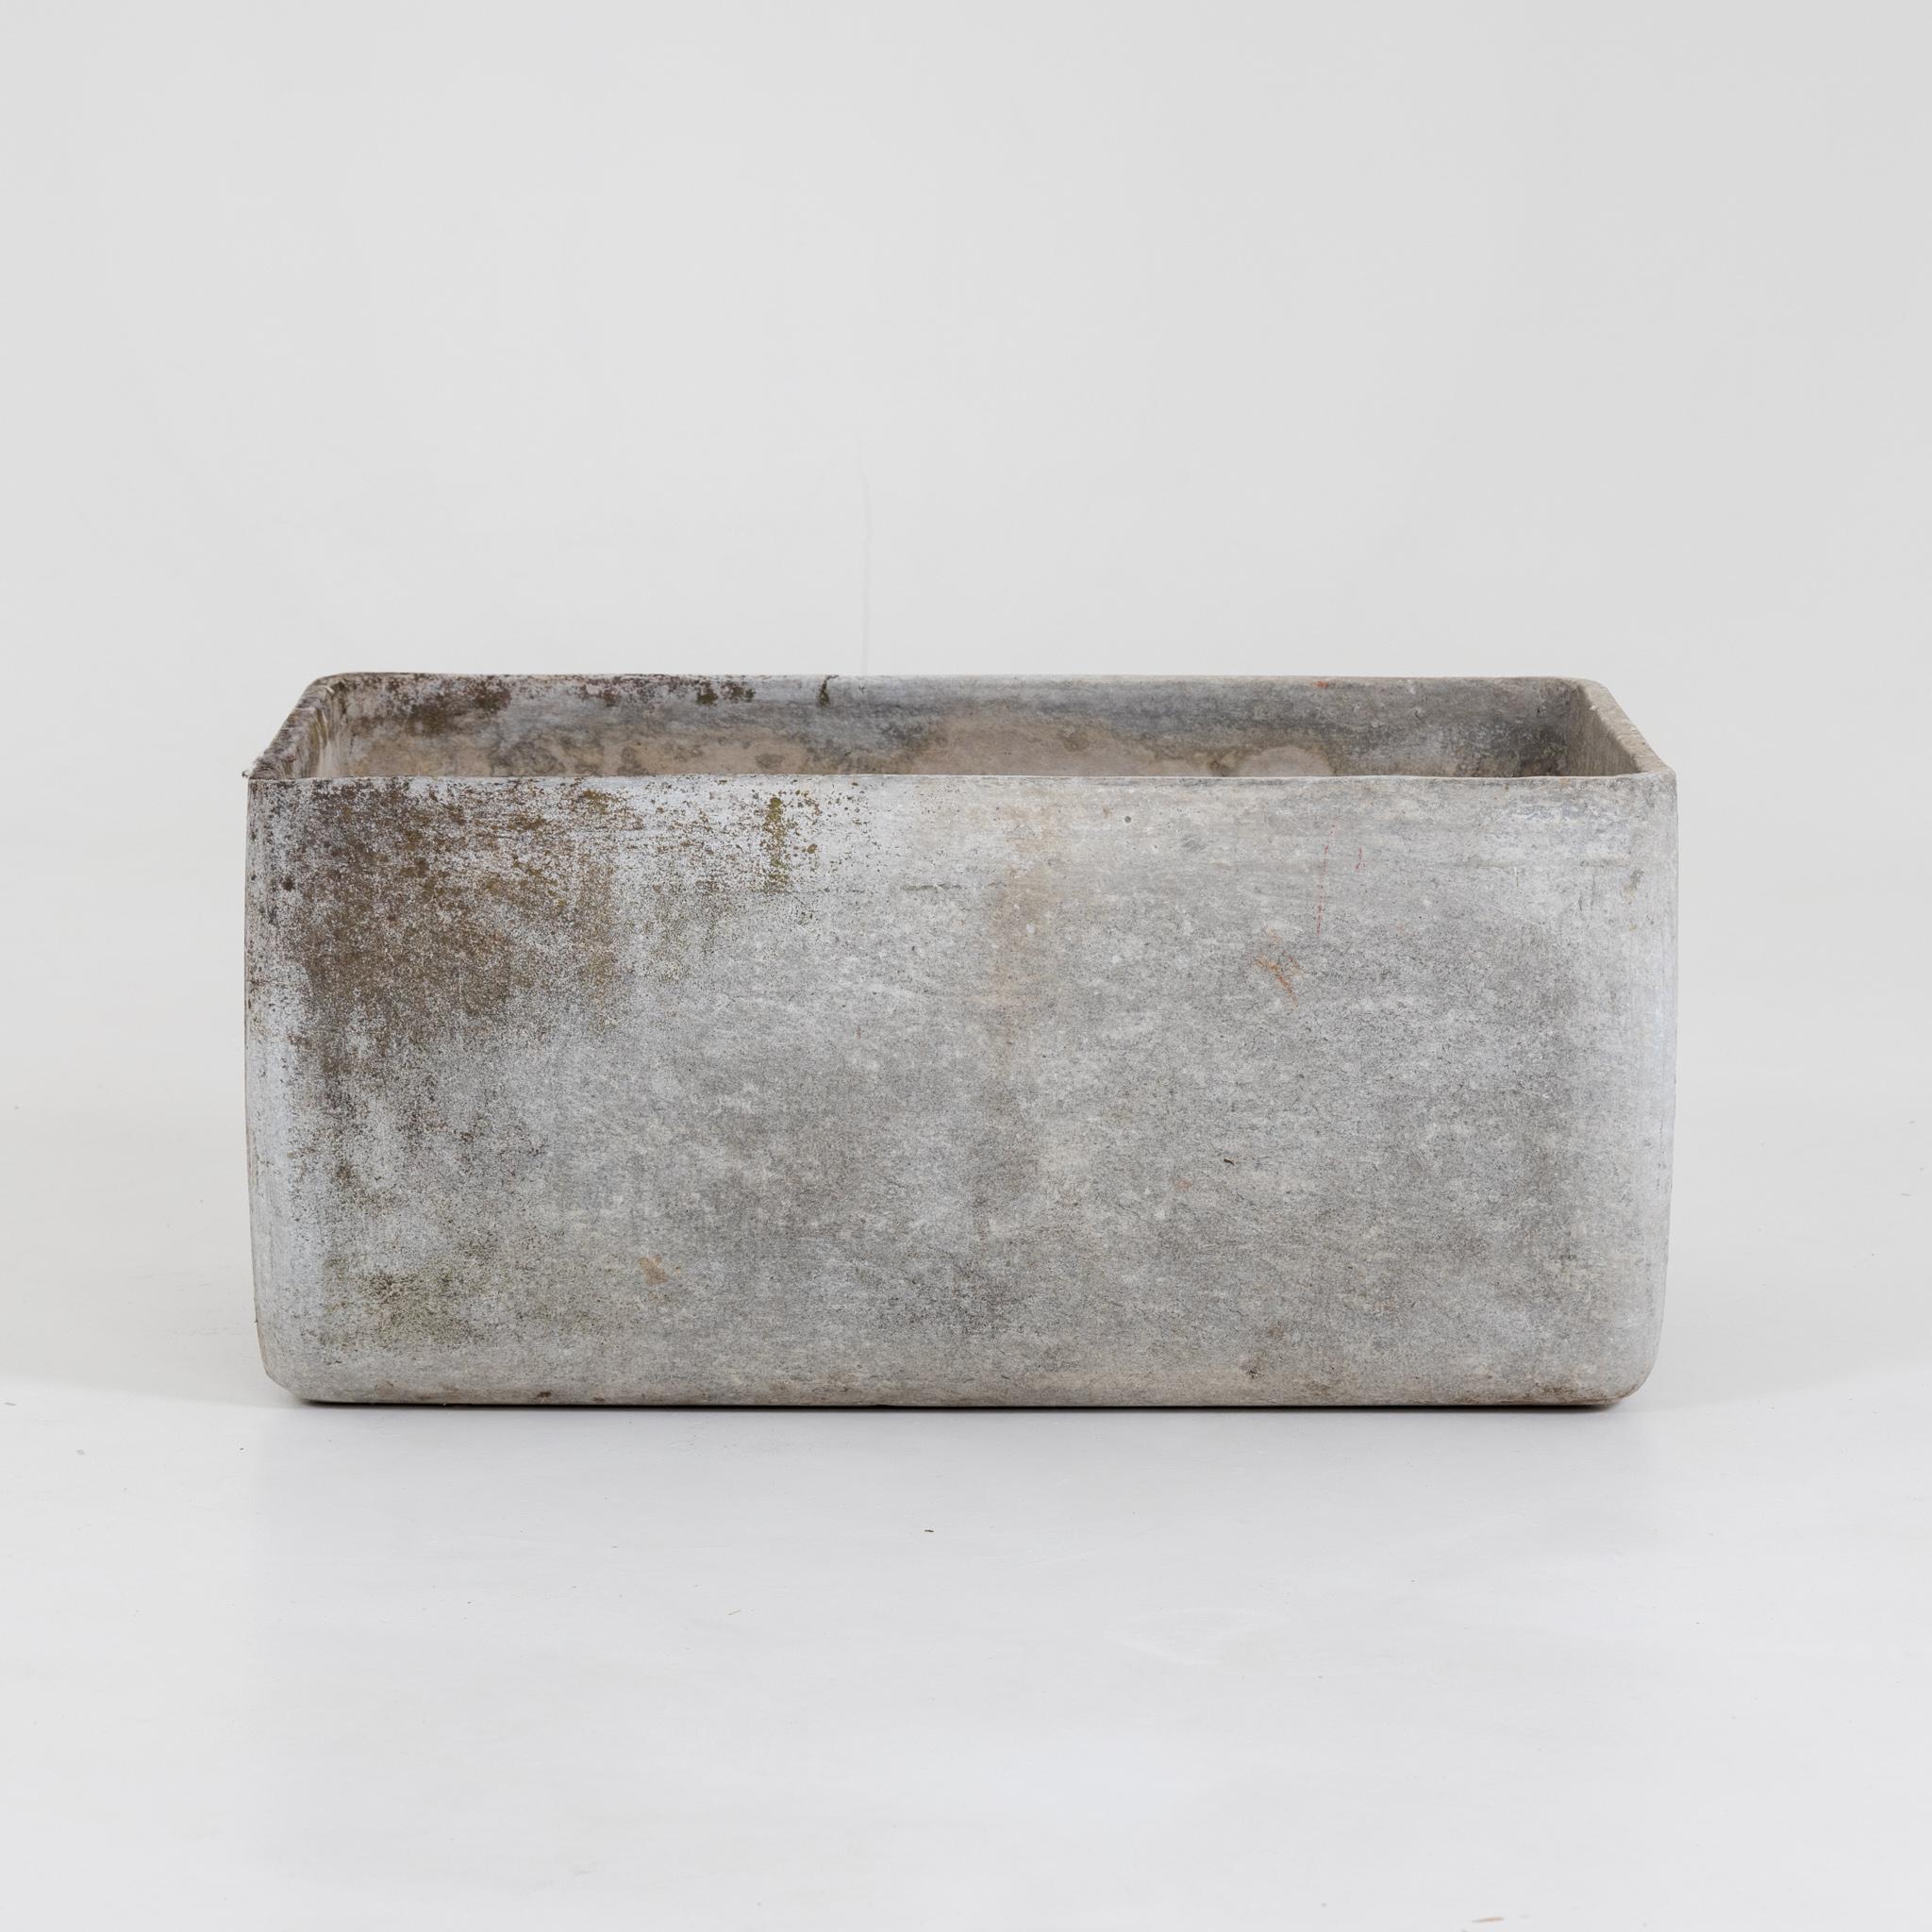 Rectangular planter bowl with concave indented bottom and convex wall. Signs of age and use.